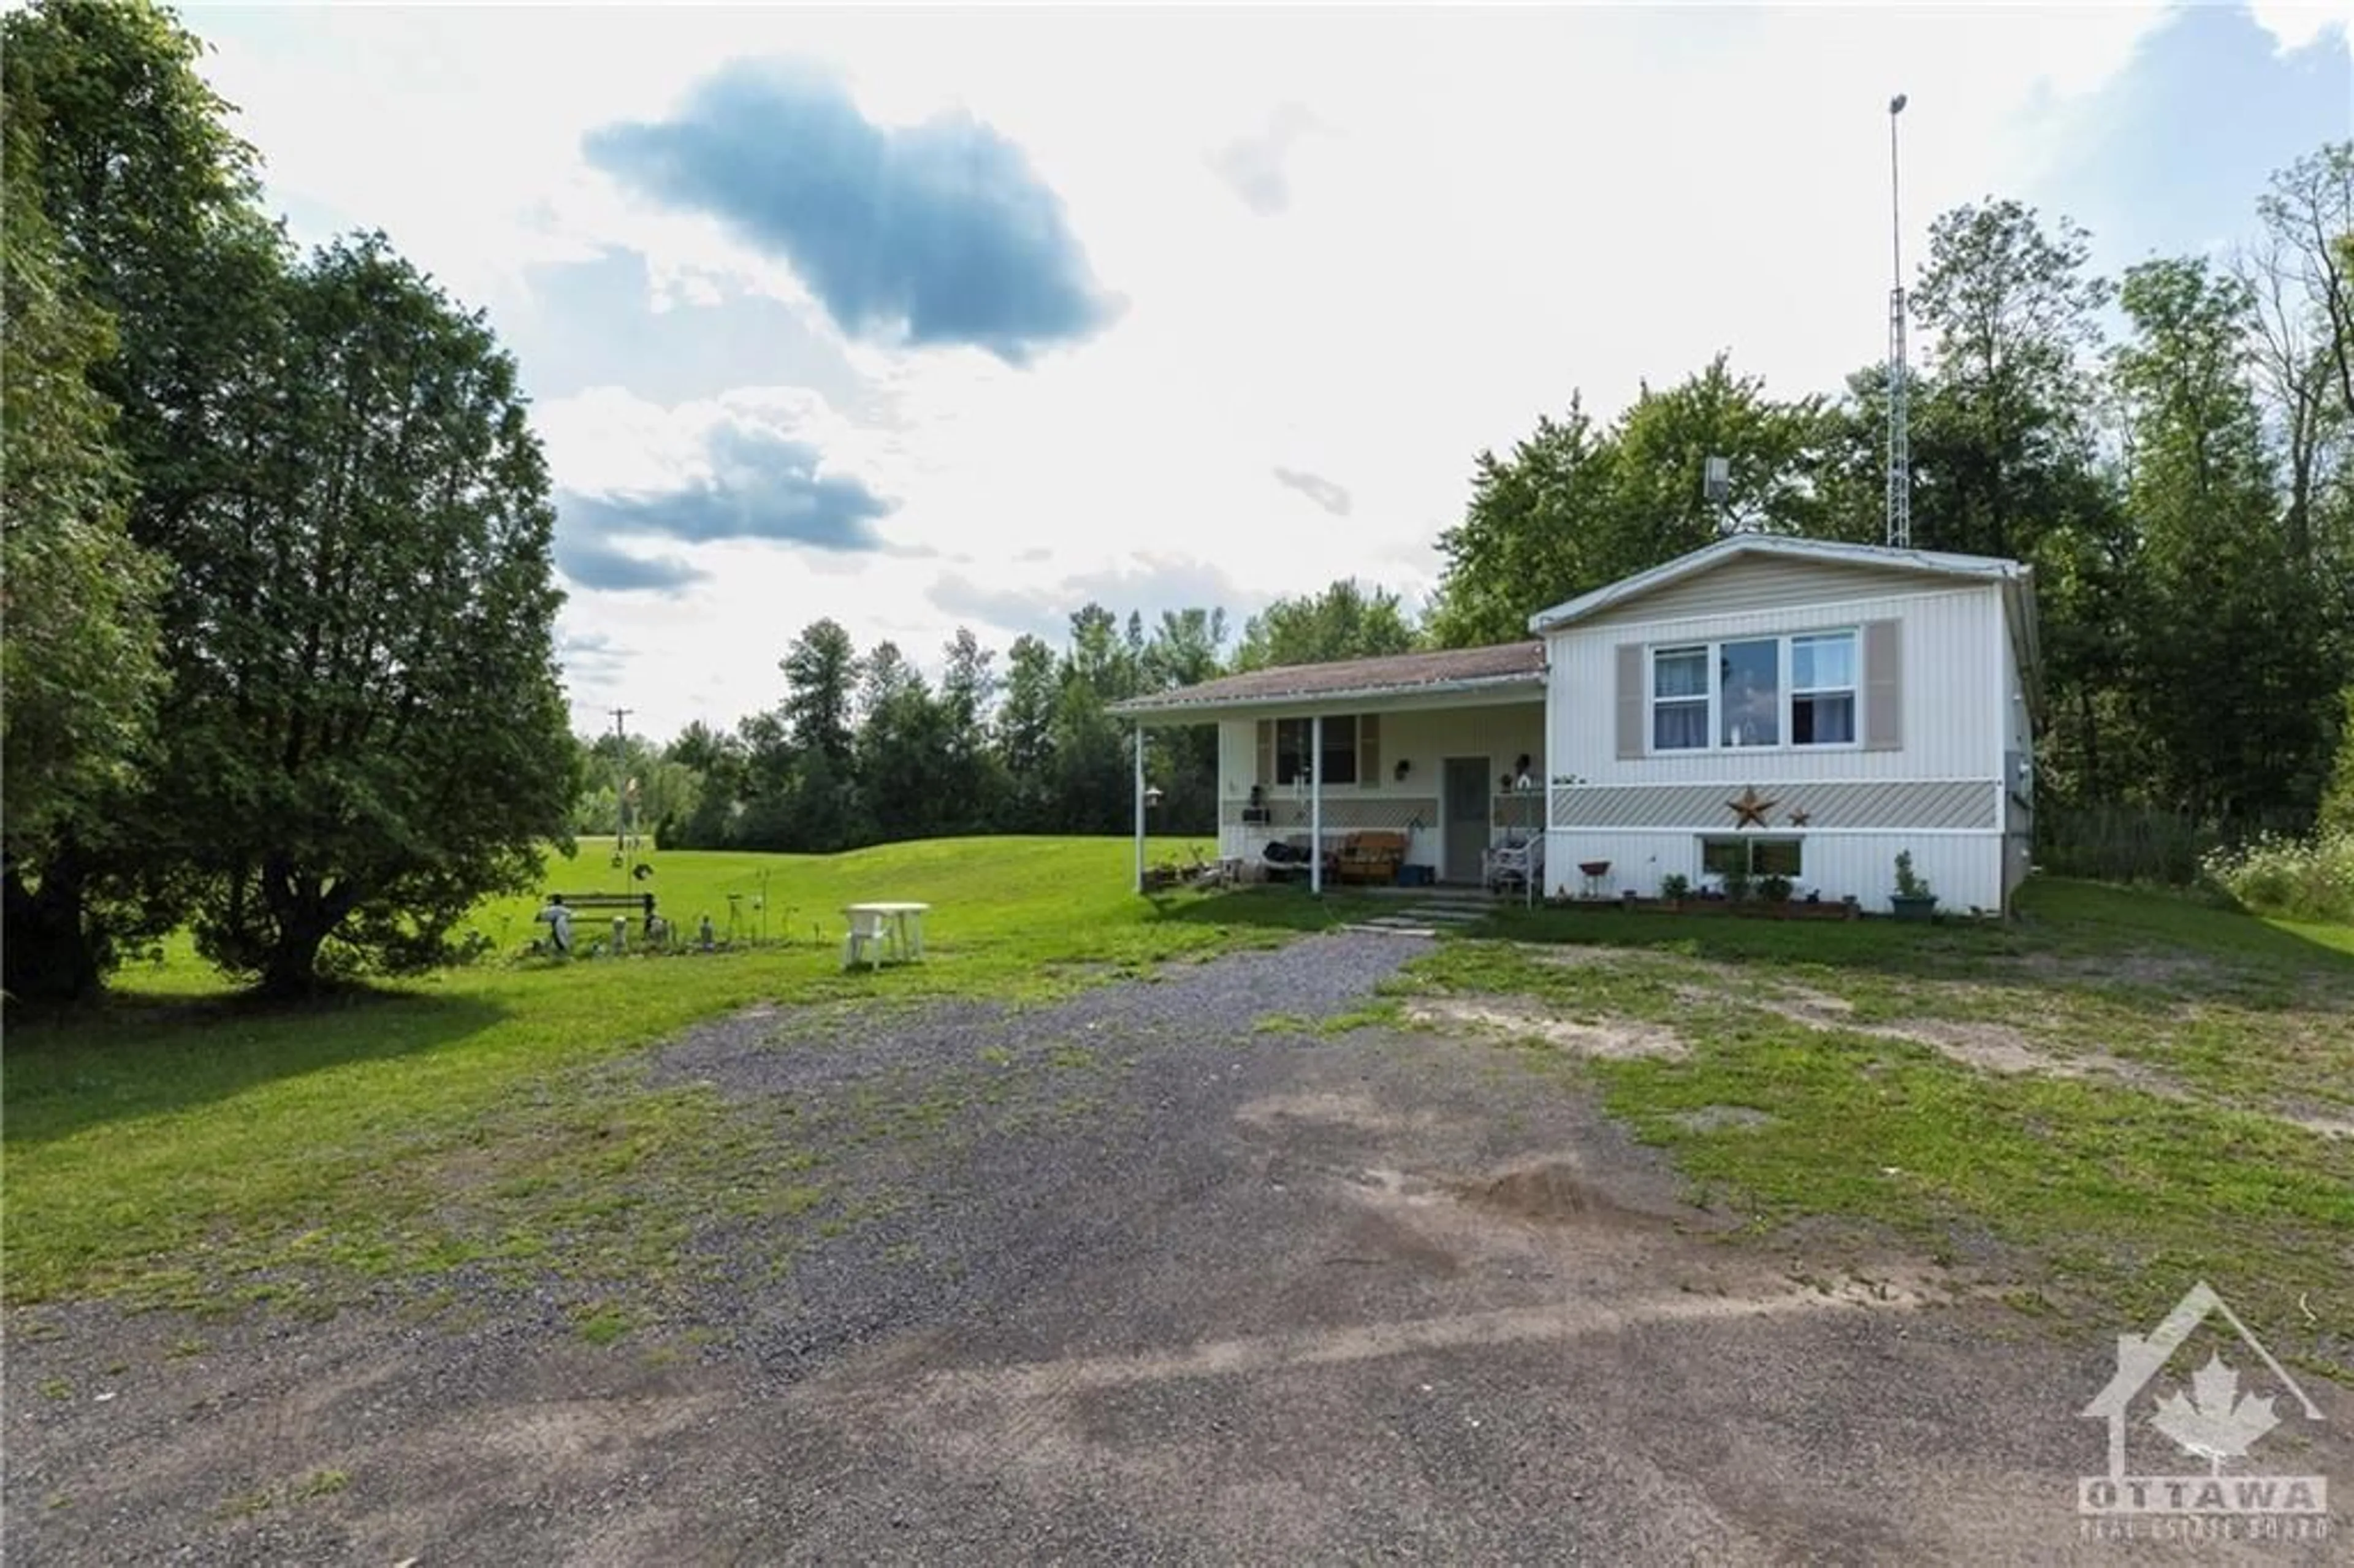 Street view for 13425 COUNTY RD 2 Rd, Morrisburg Ontario K0C 1X0